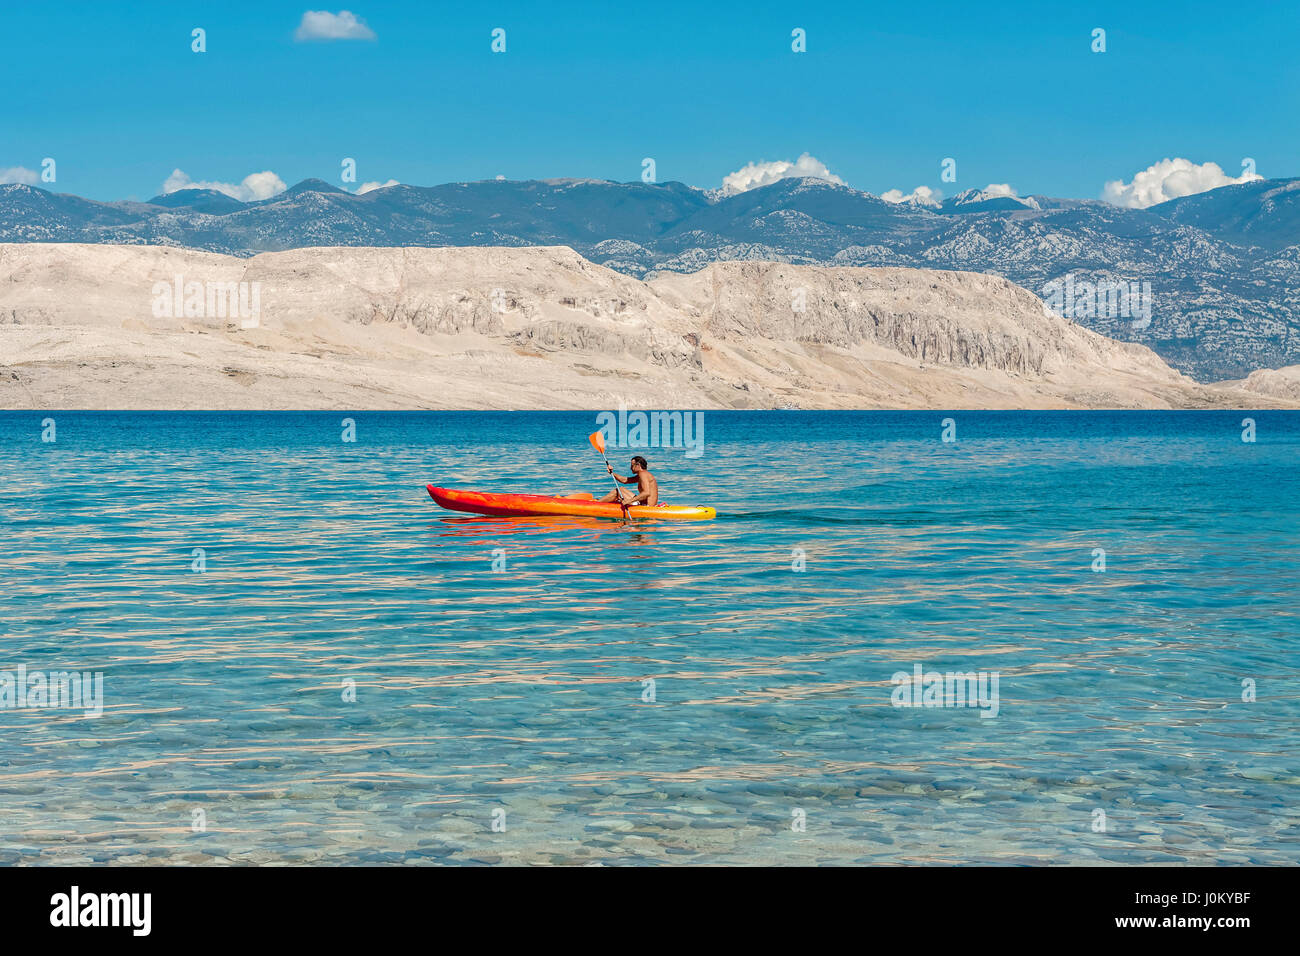 Pag Village High Resolution Stock Photography and Images - Alamy